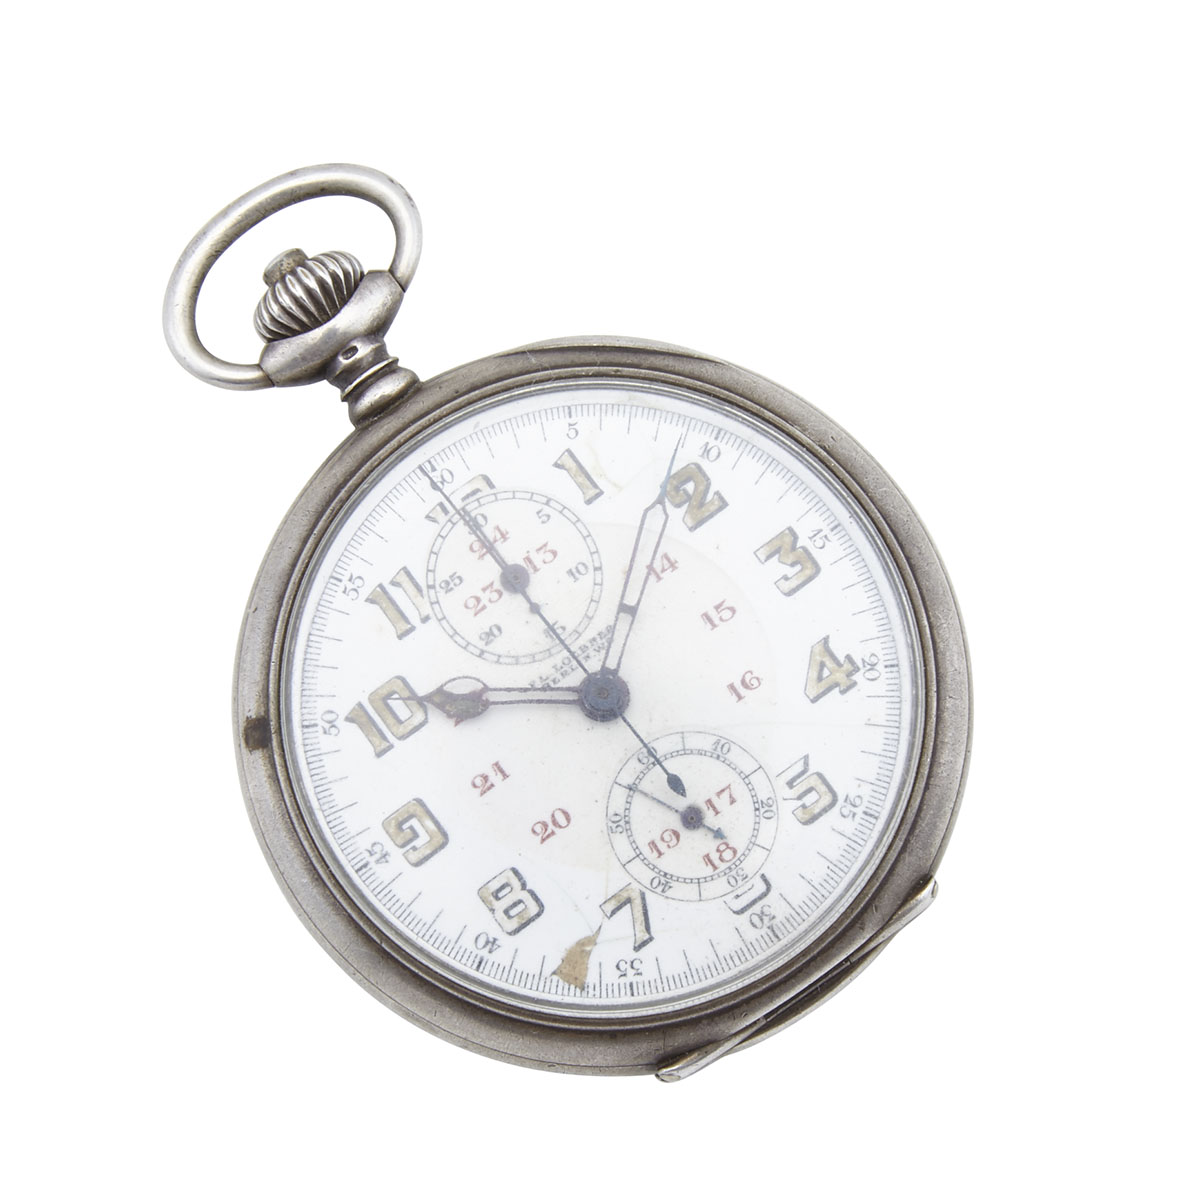 F.A.Löbner Of Berlin Reichsmarine Of The Weimar Republic Openface Pocket Watch With Chronograph